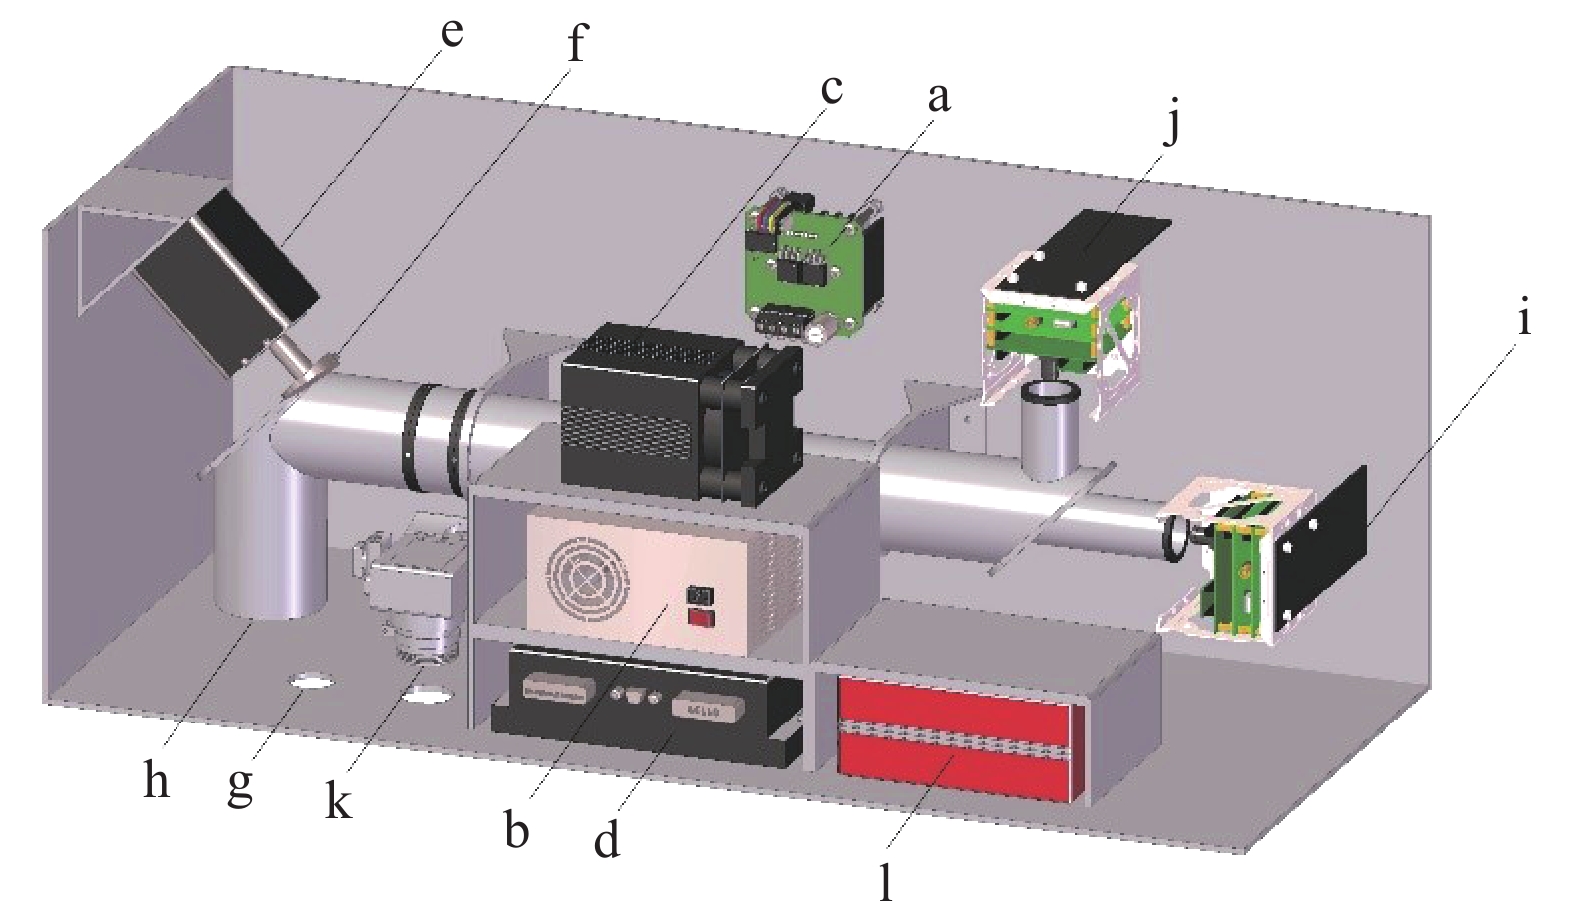 System structure of LiDAR. a-Integrated control unit; b-Power supply; c-532 nm laser; d-Motor driver; e-24V DC servo motor; f-Reflective wedge; g-Optical emission channel; h-Optical receiving channel; i-APD and its processing circuit; j-PMT and its processing circuit; k-Area array multispectral high resolution CCD camera; l-POS system